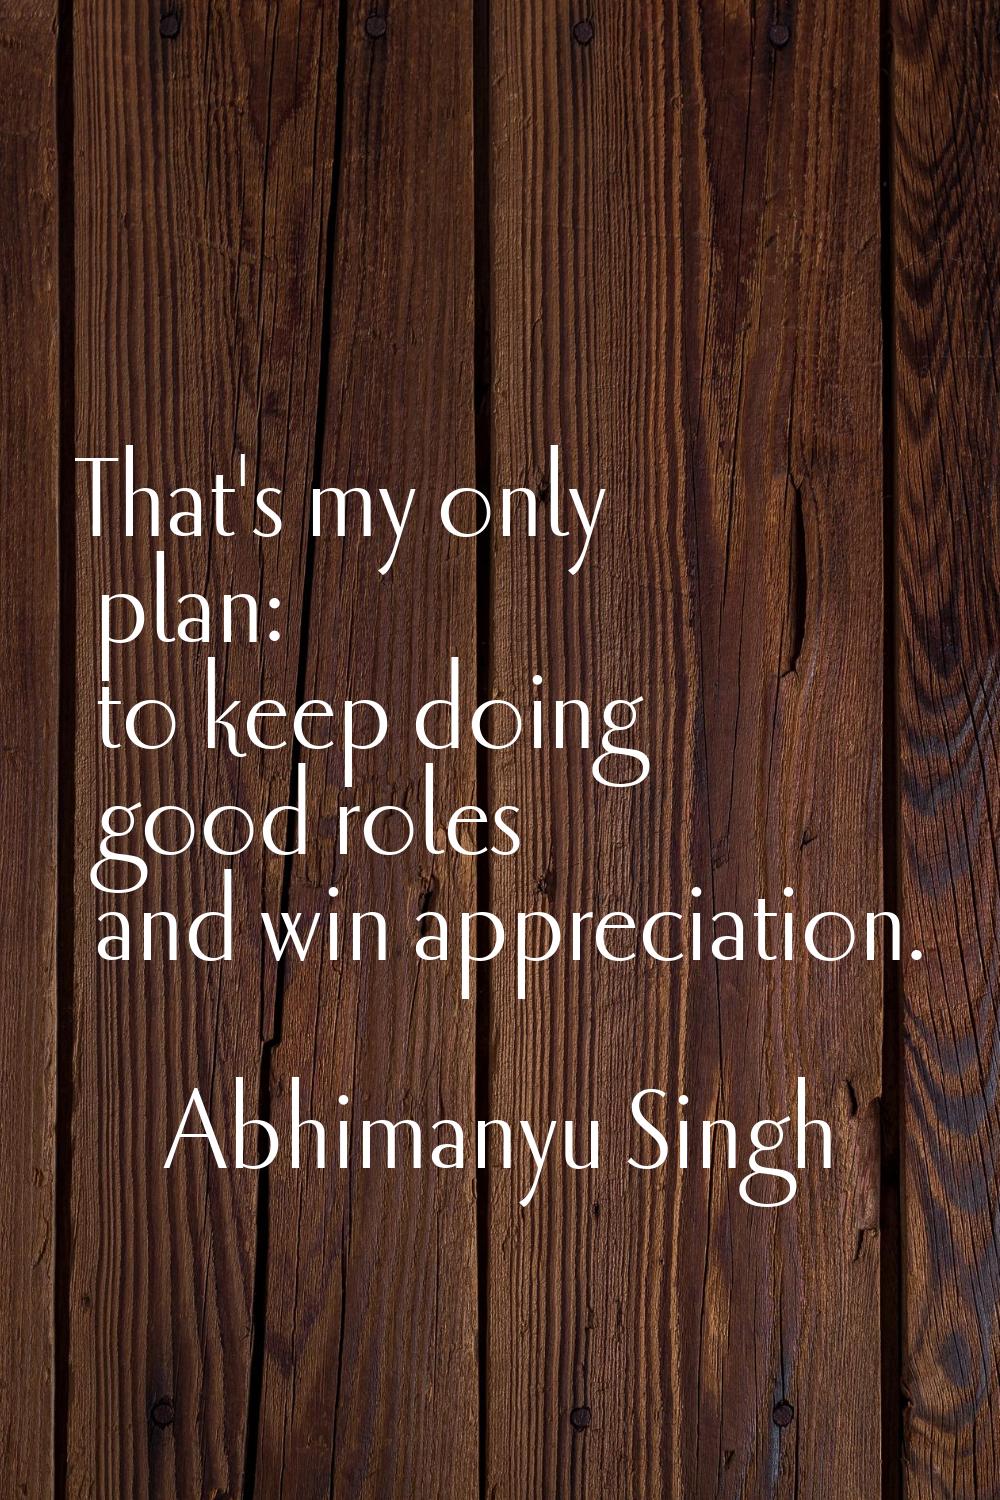 That's my only plan: to keep doing good roles and win appreciation.